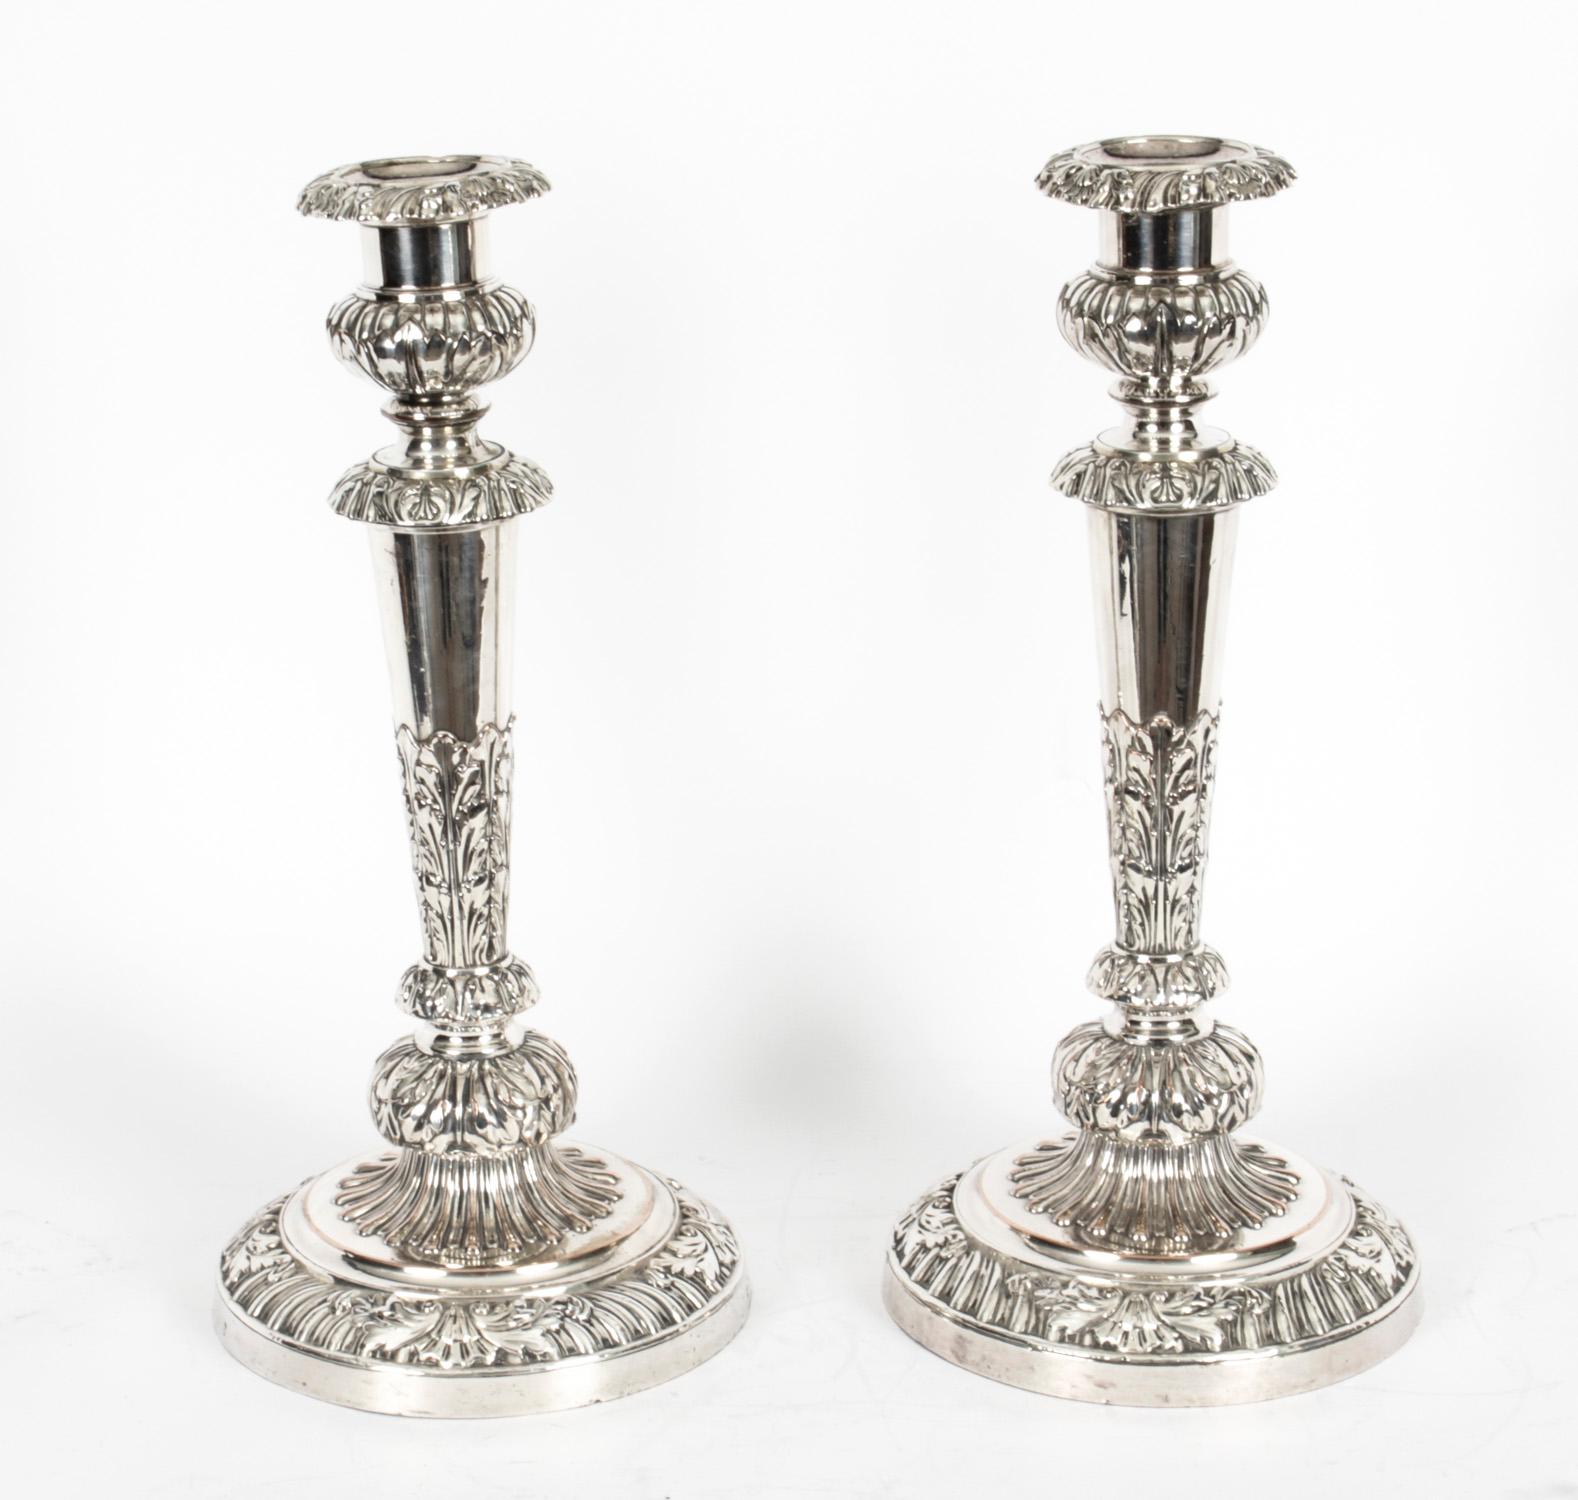 This is a stunning monumental pair of antique English Old Sheffield silver on copper, three light, two-branch table candelabra, circa 1790 in date, and bearing the sunburst makers marks of the world renowned silversmith Matthew Boulton.
 
The